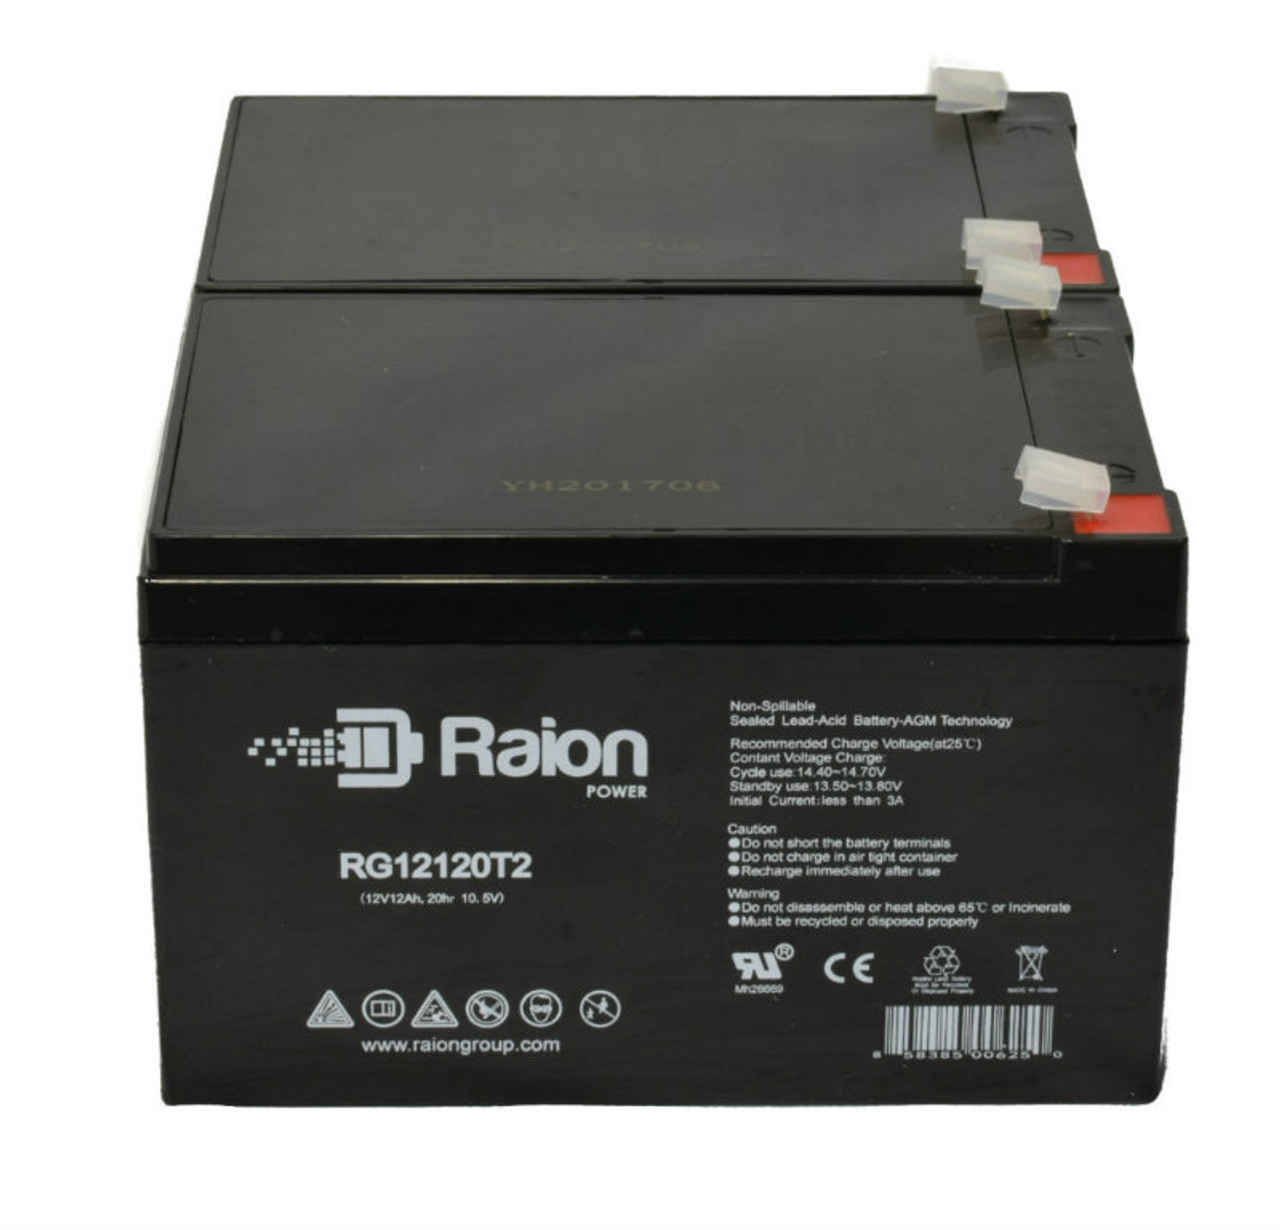 Raion Power RG12120T2 Replacement Battery Set for ShoPride Mobilityr Scootie (TE-787NA) Mobility Scooter - 2 Pack